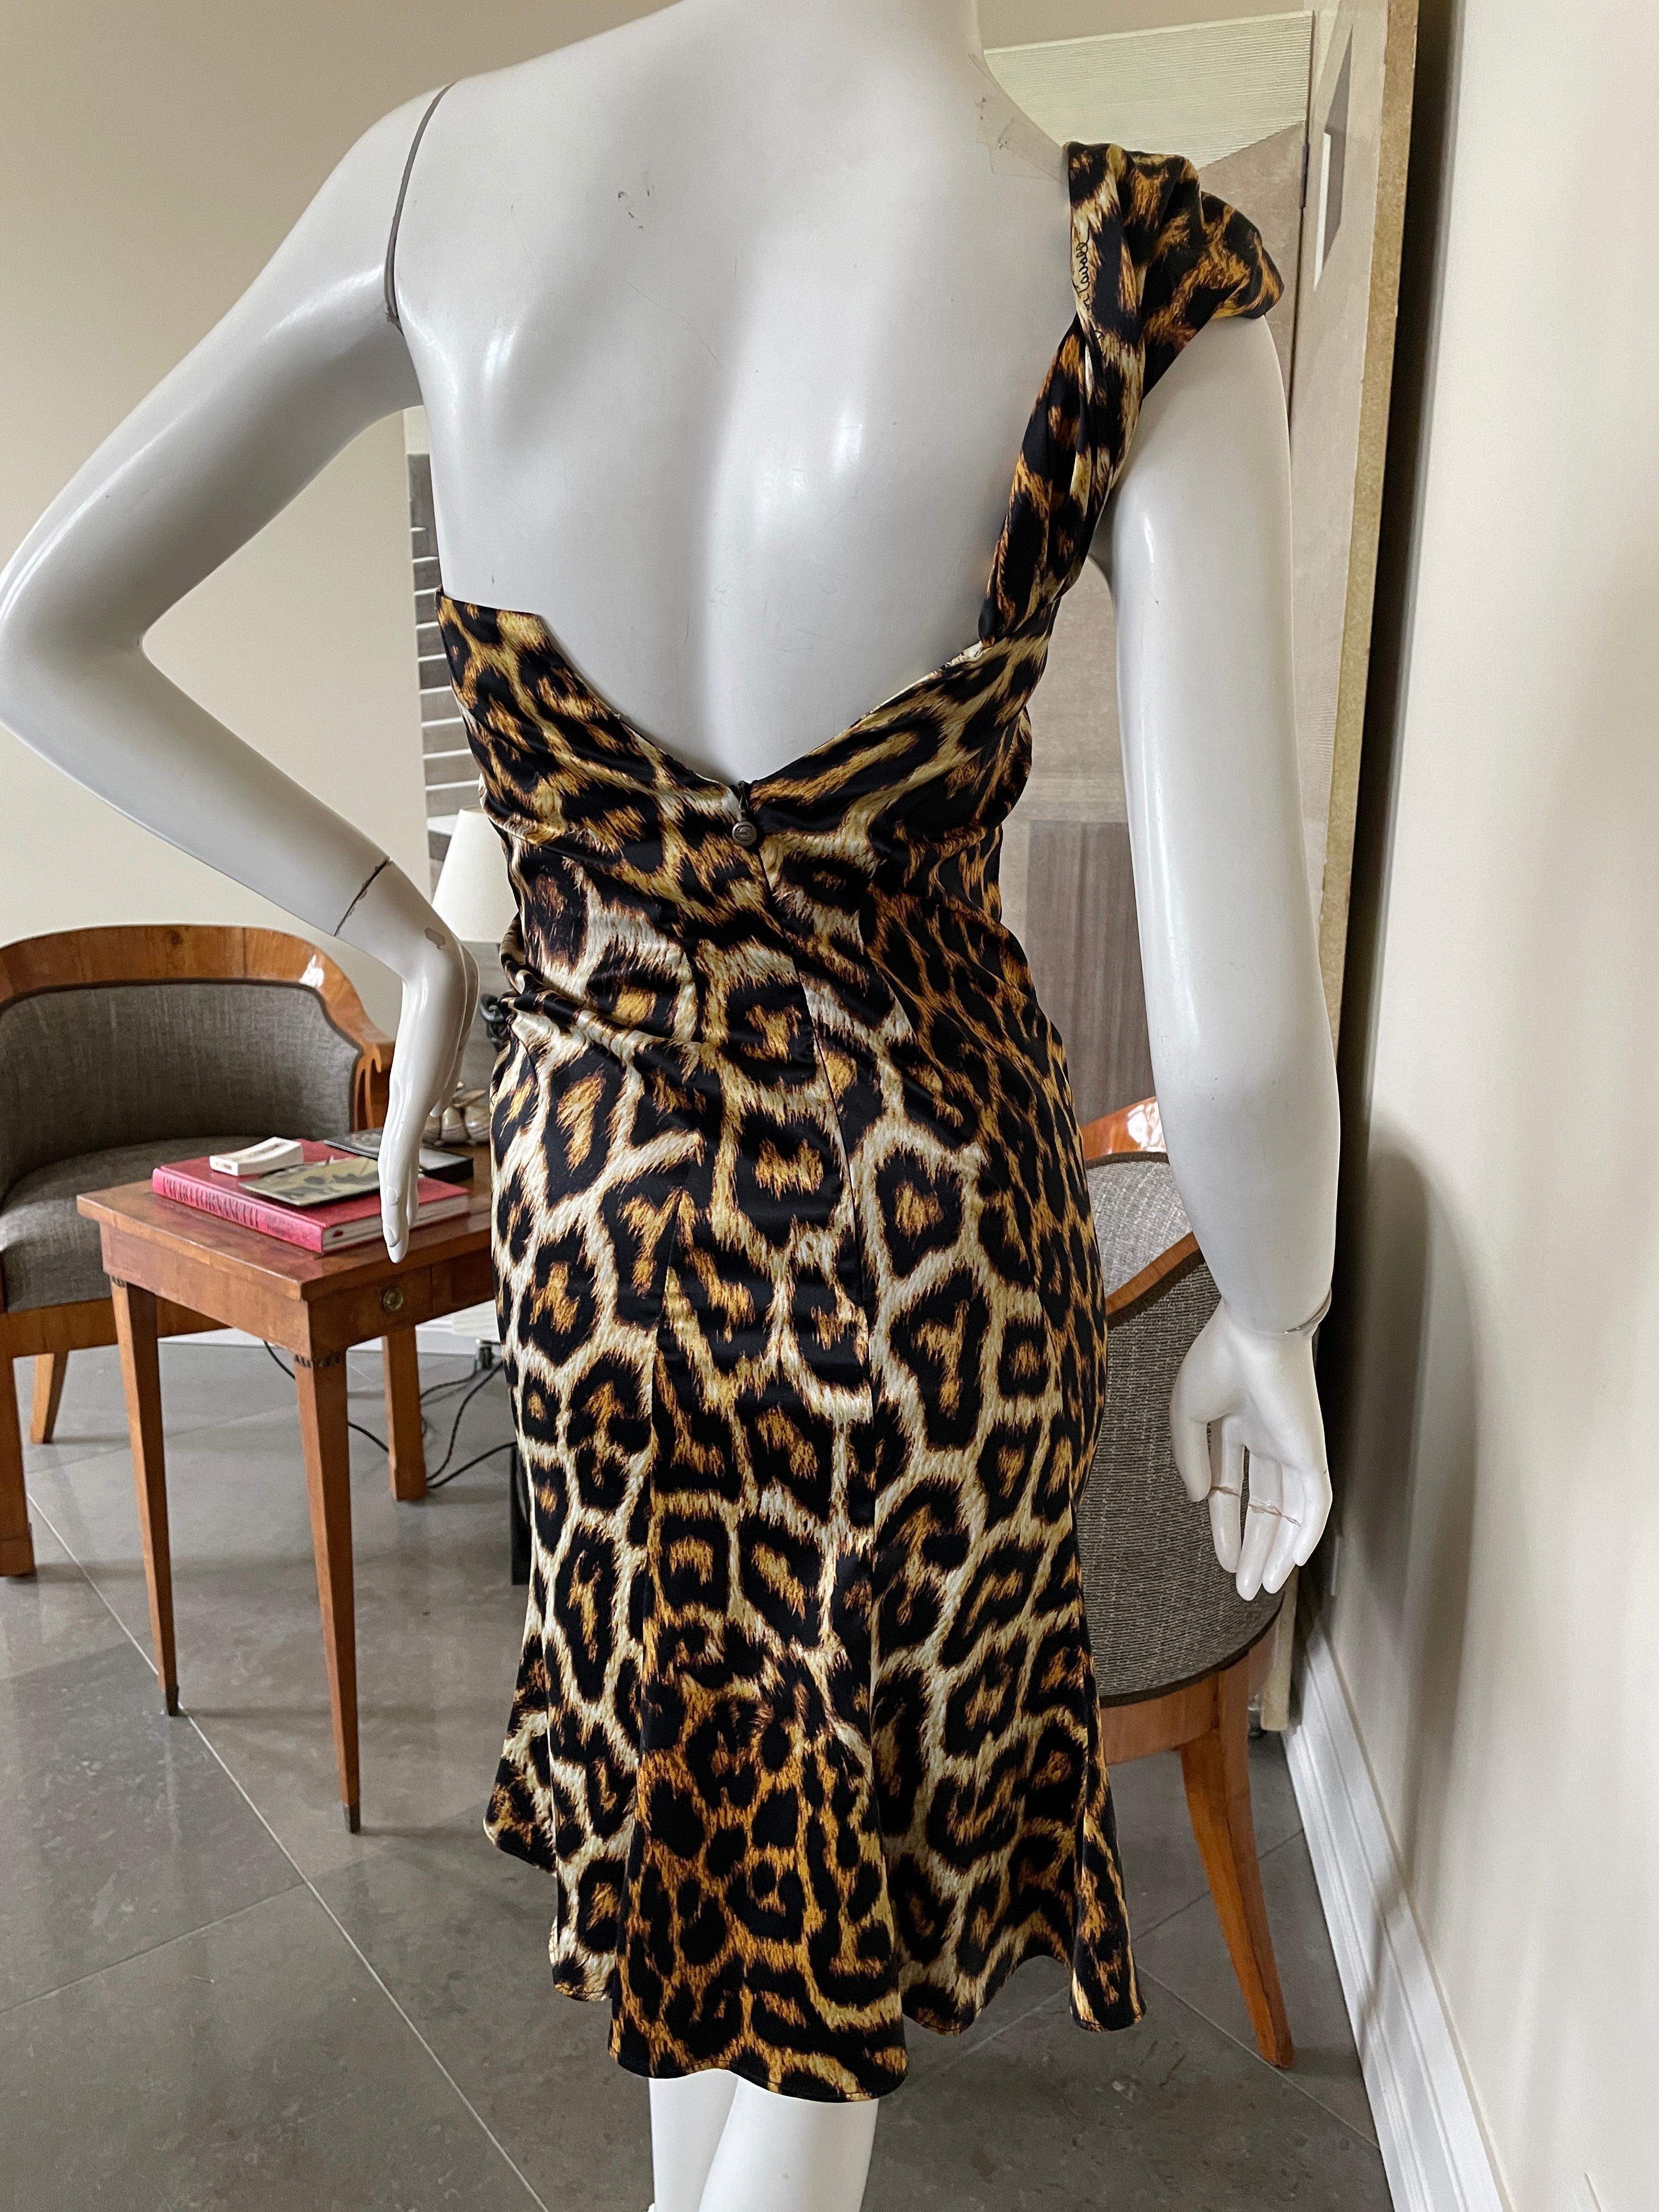 Roberto Cavalli for Just Cavalli Leopard Print One Shoulder Cocktail Dress In Excellent Condition For Sale In Cloverdale, CA